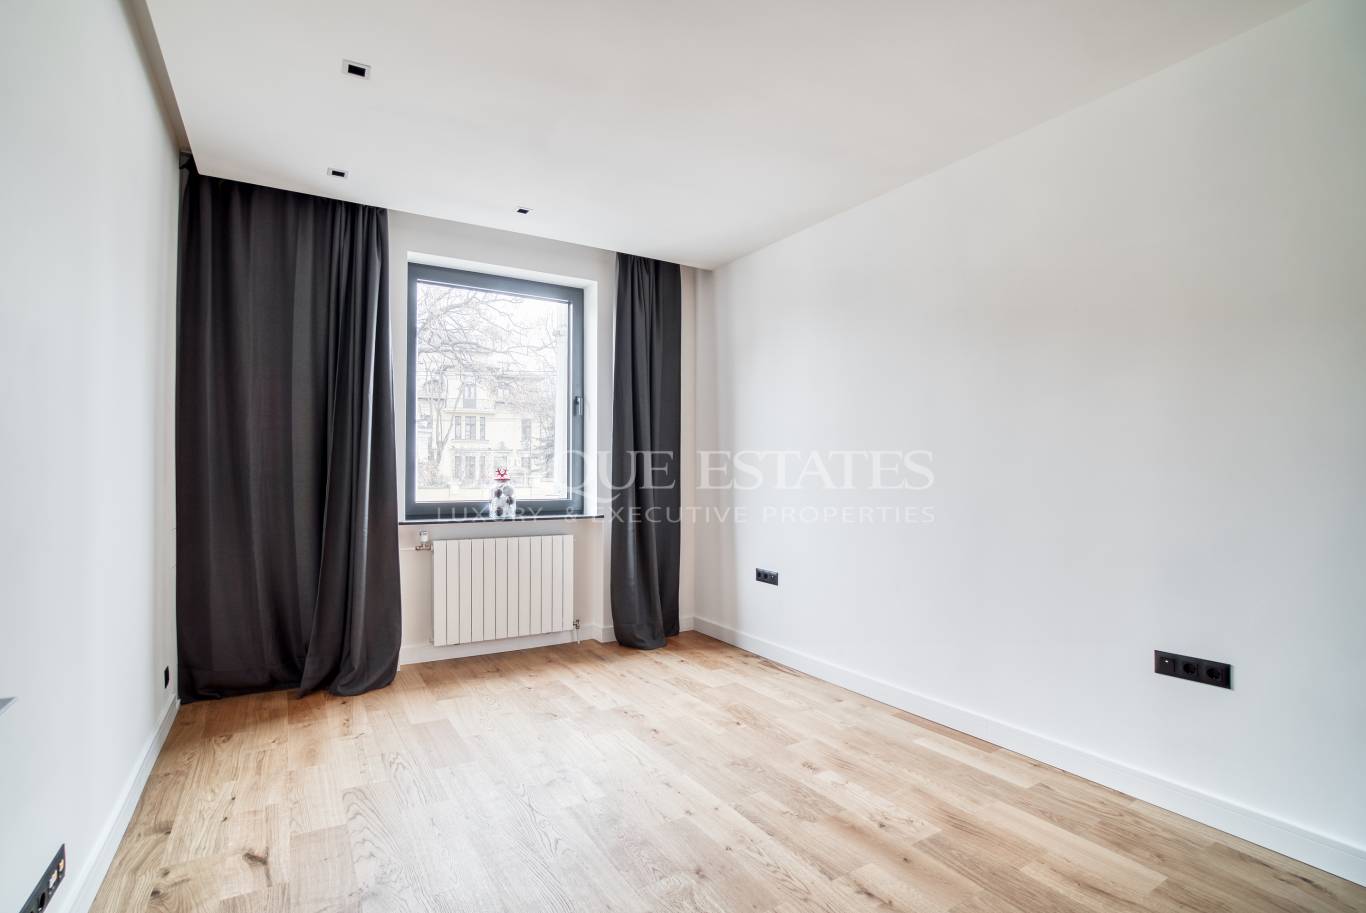 Apartment for sale in Sofia, Downtown with listing ID: K16825 - image 7